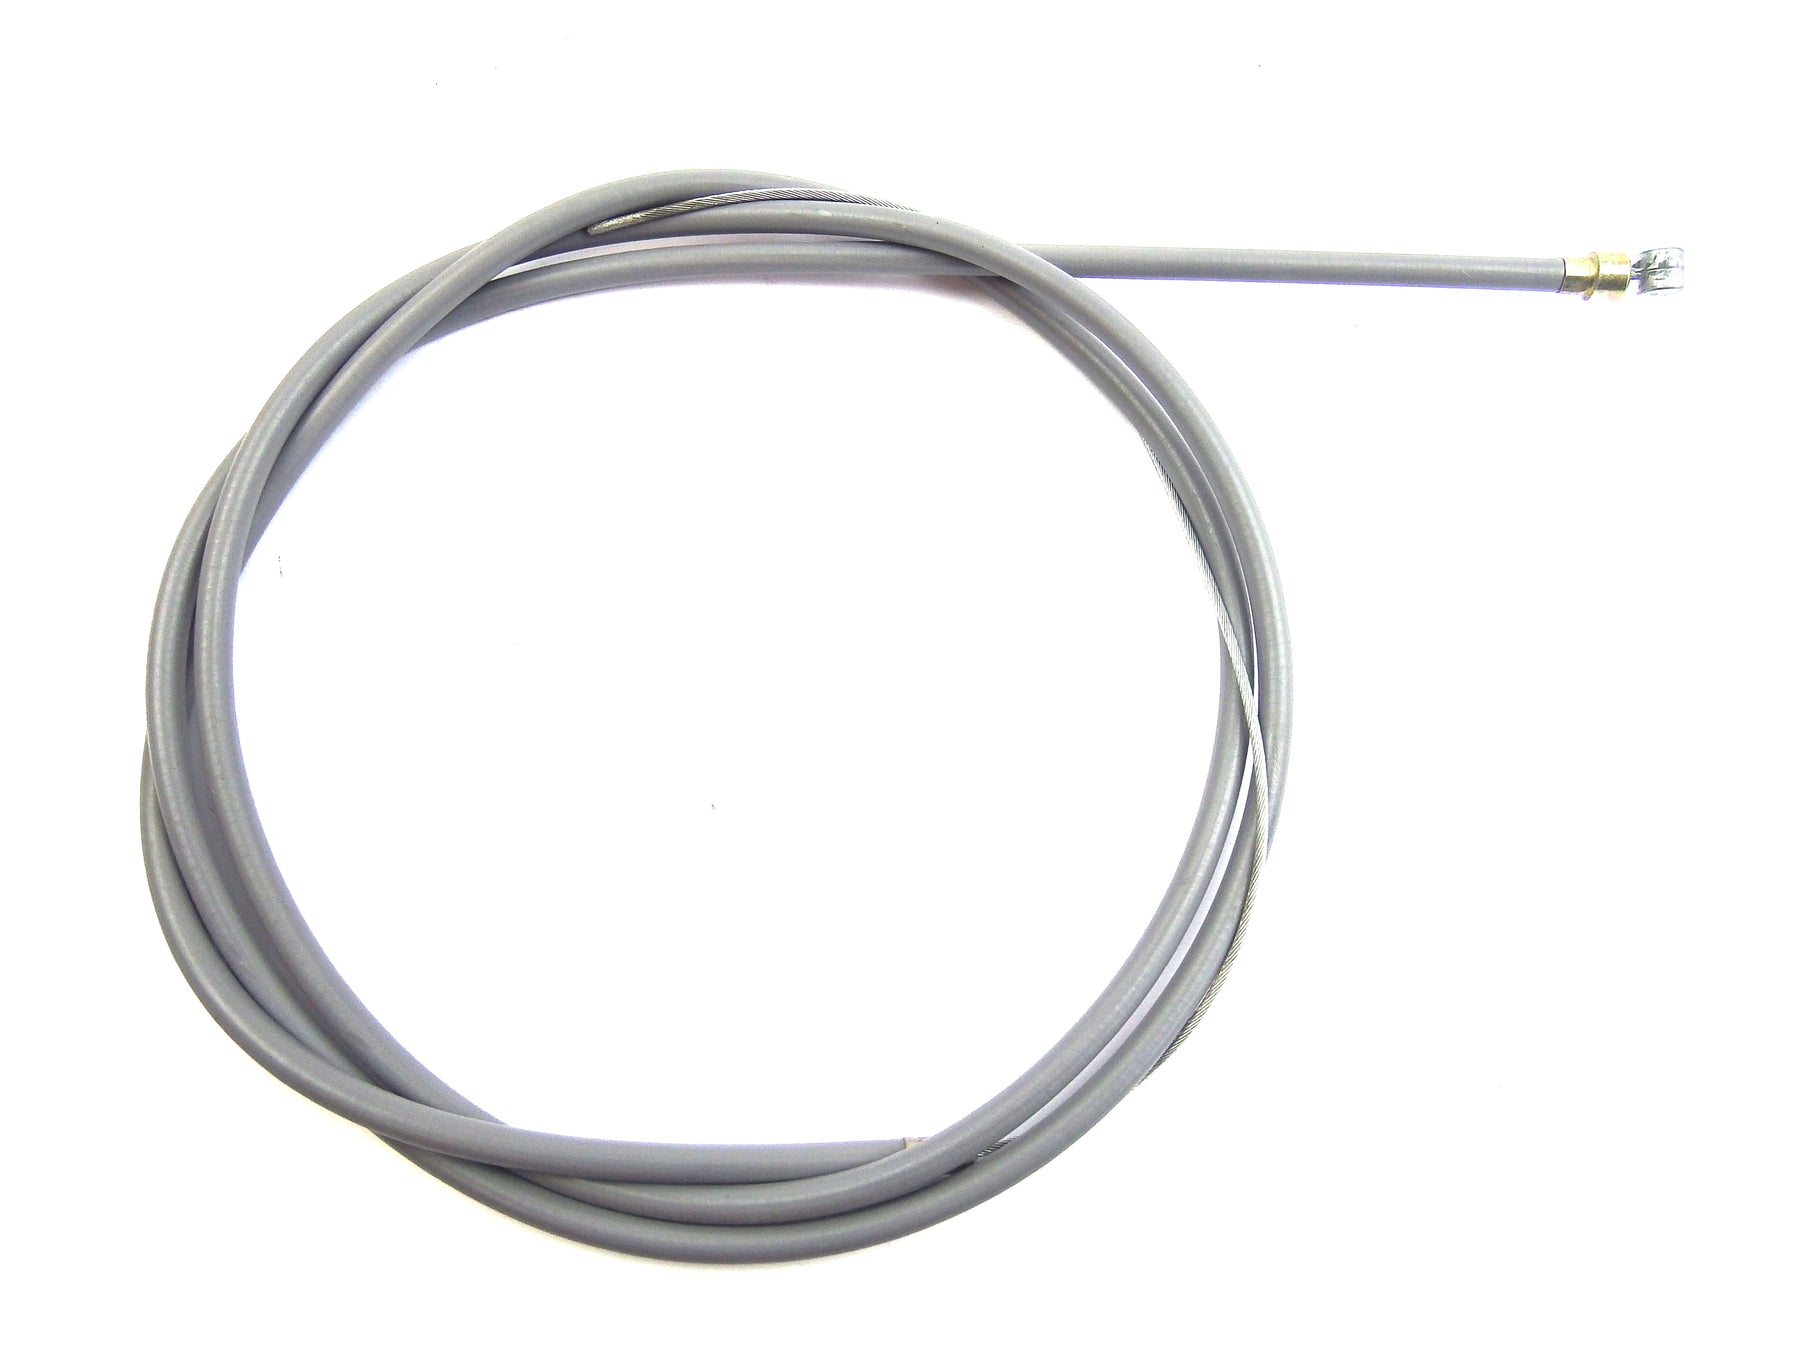 Vespa - Cable - Front Brake Cable Complete - Extra Long